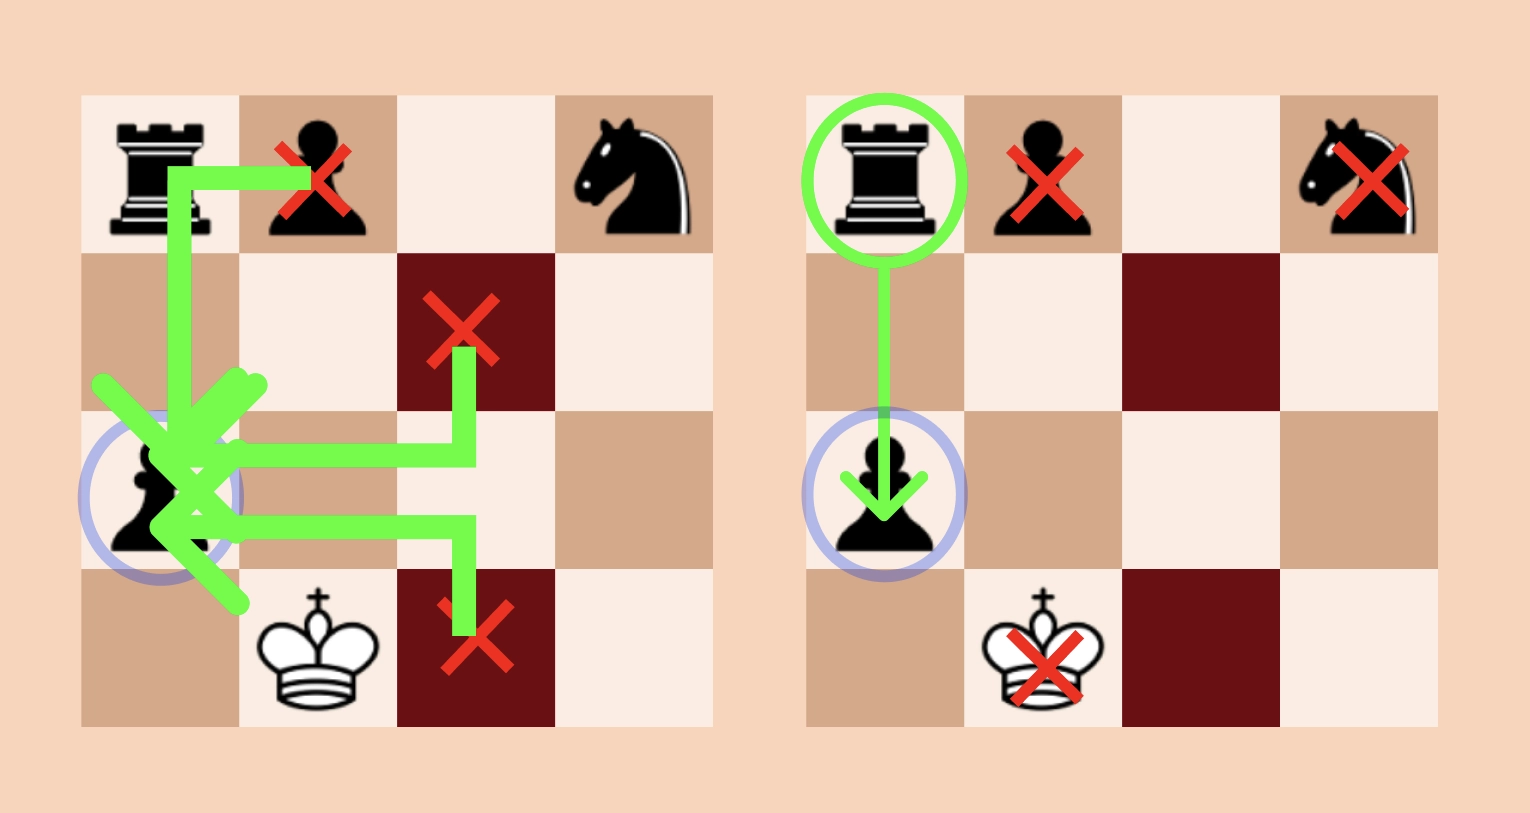 A Game Designer Thinks He Can Improve on Chess' 1,500-Year-Old Rules, Smart News